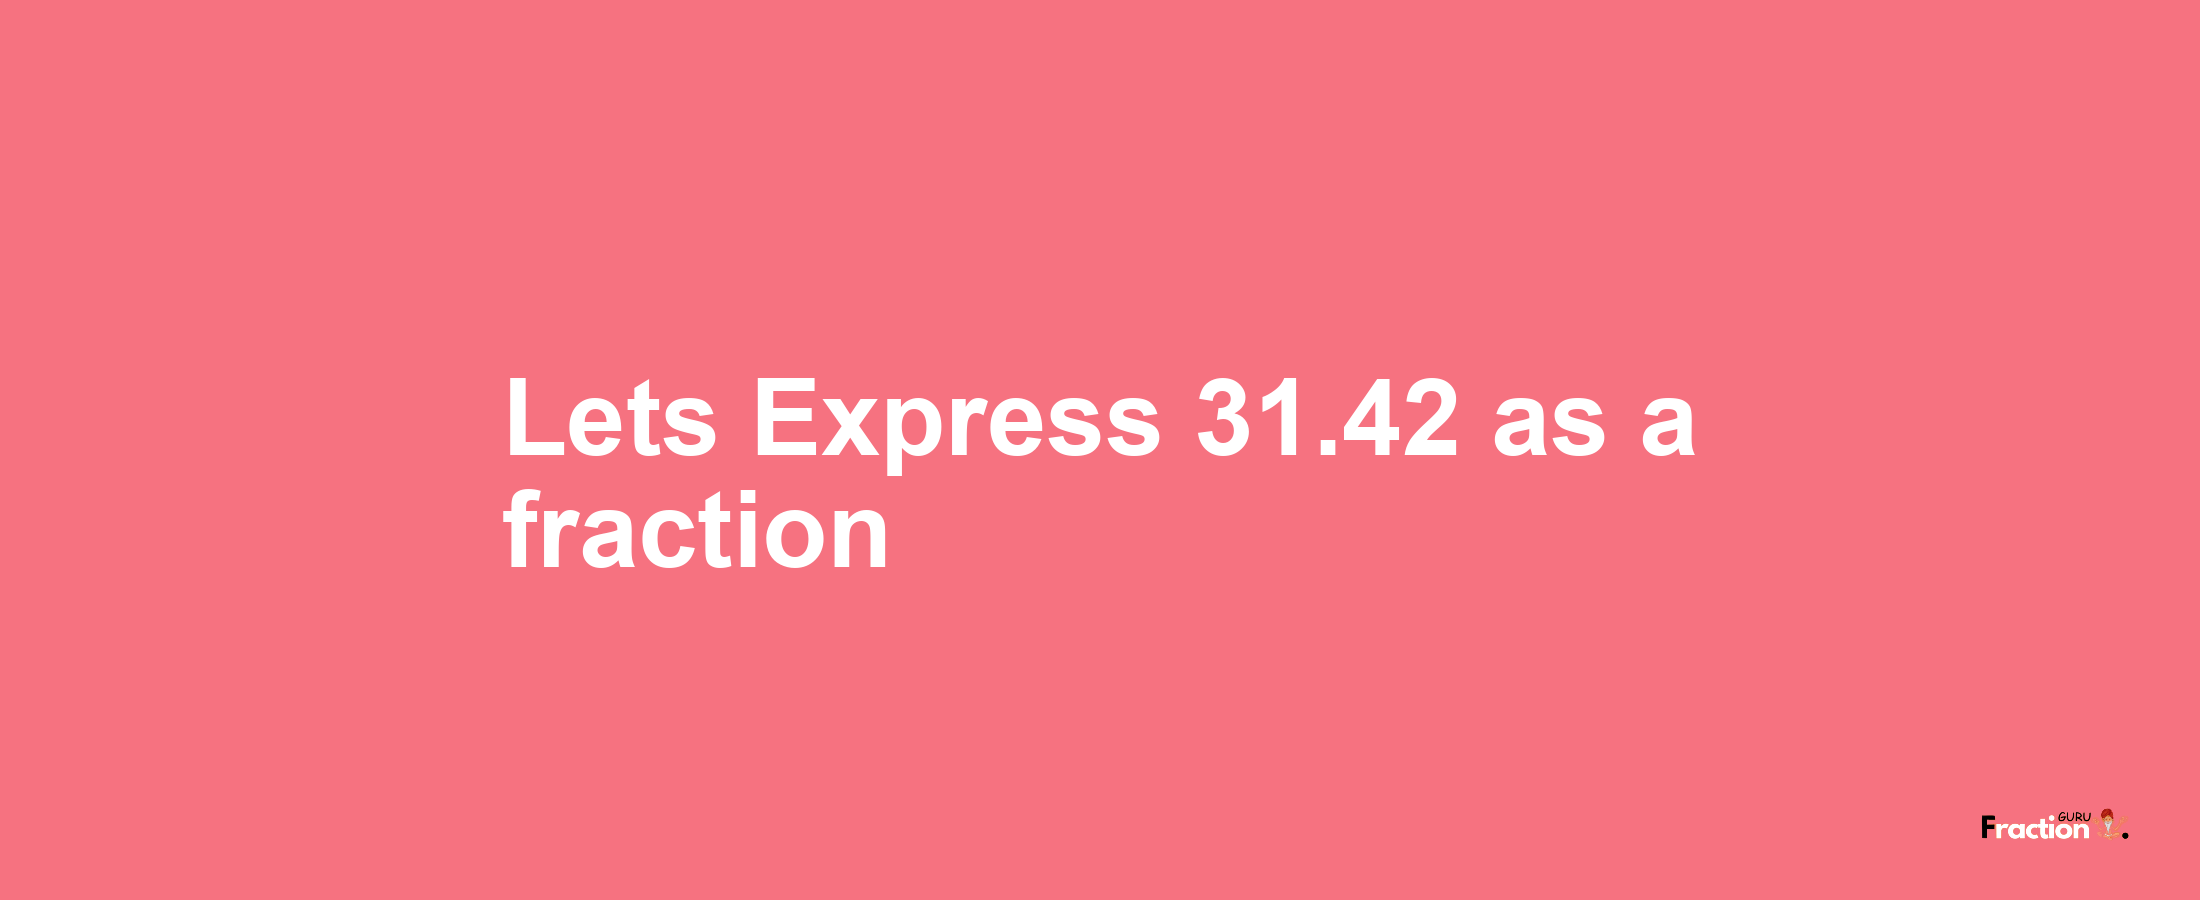 Lets Express 31.42 as afraction